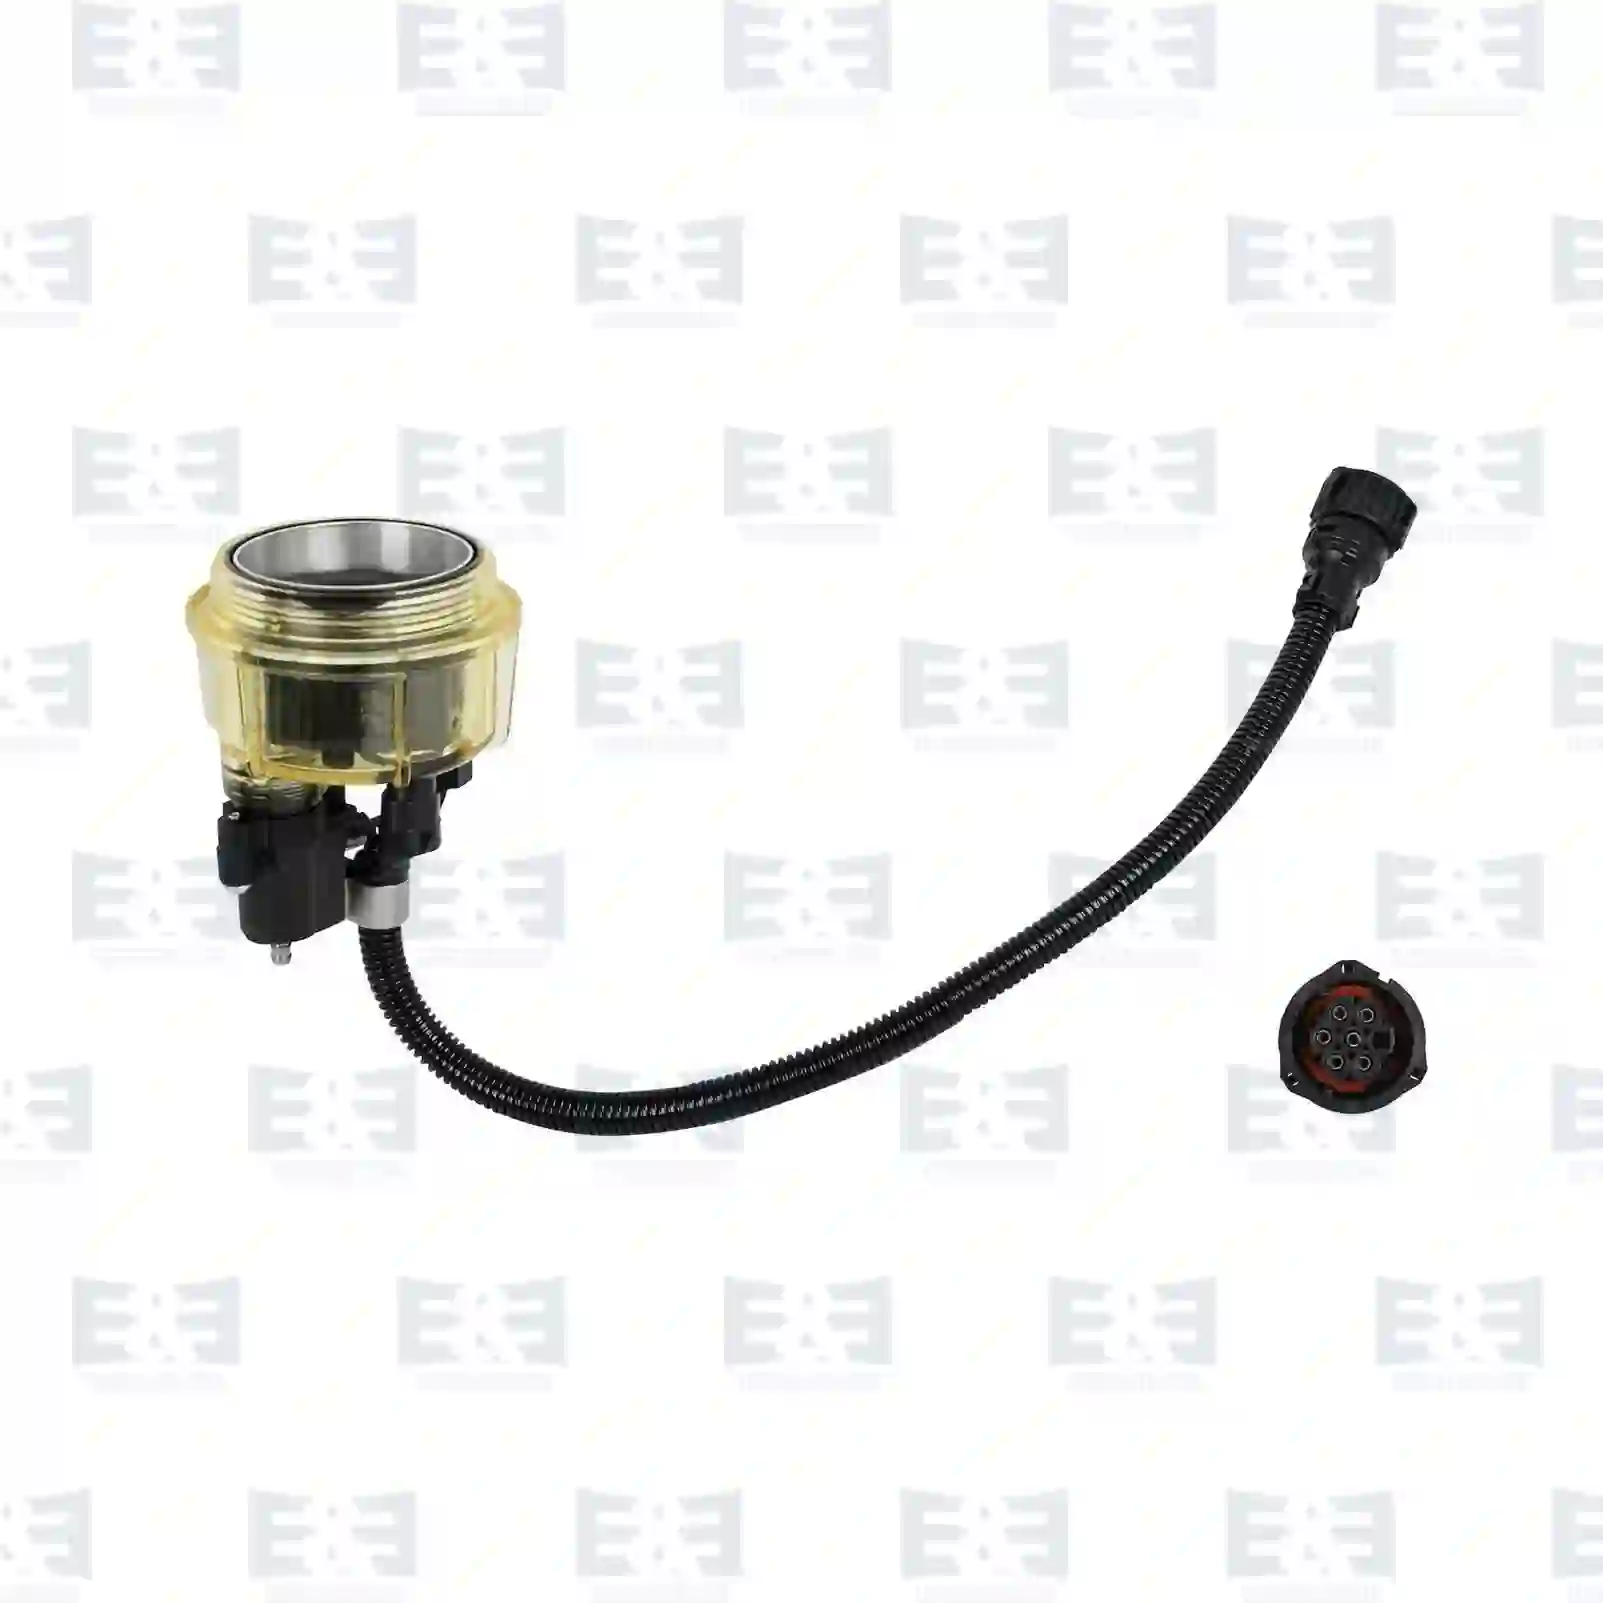 Collecting pan, fuel filter, heated, 2E2287158, 7420875073, 20808386, 20870050, 20875073 ||  2E2287158 E&E Truck Spare Parts | Truck Spare Parts, Auotomotive Spare Parts Collecting pan, fuel filter, heated, 2E2287158, 7420875073, 20808386, 20870050, 20875073 ||  2E2287158 E&E Truck Spare Parts | Truck Spare Parts, Auotomotive Spare Parts